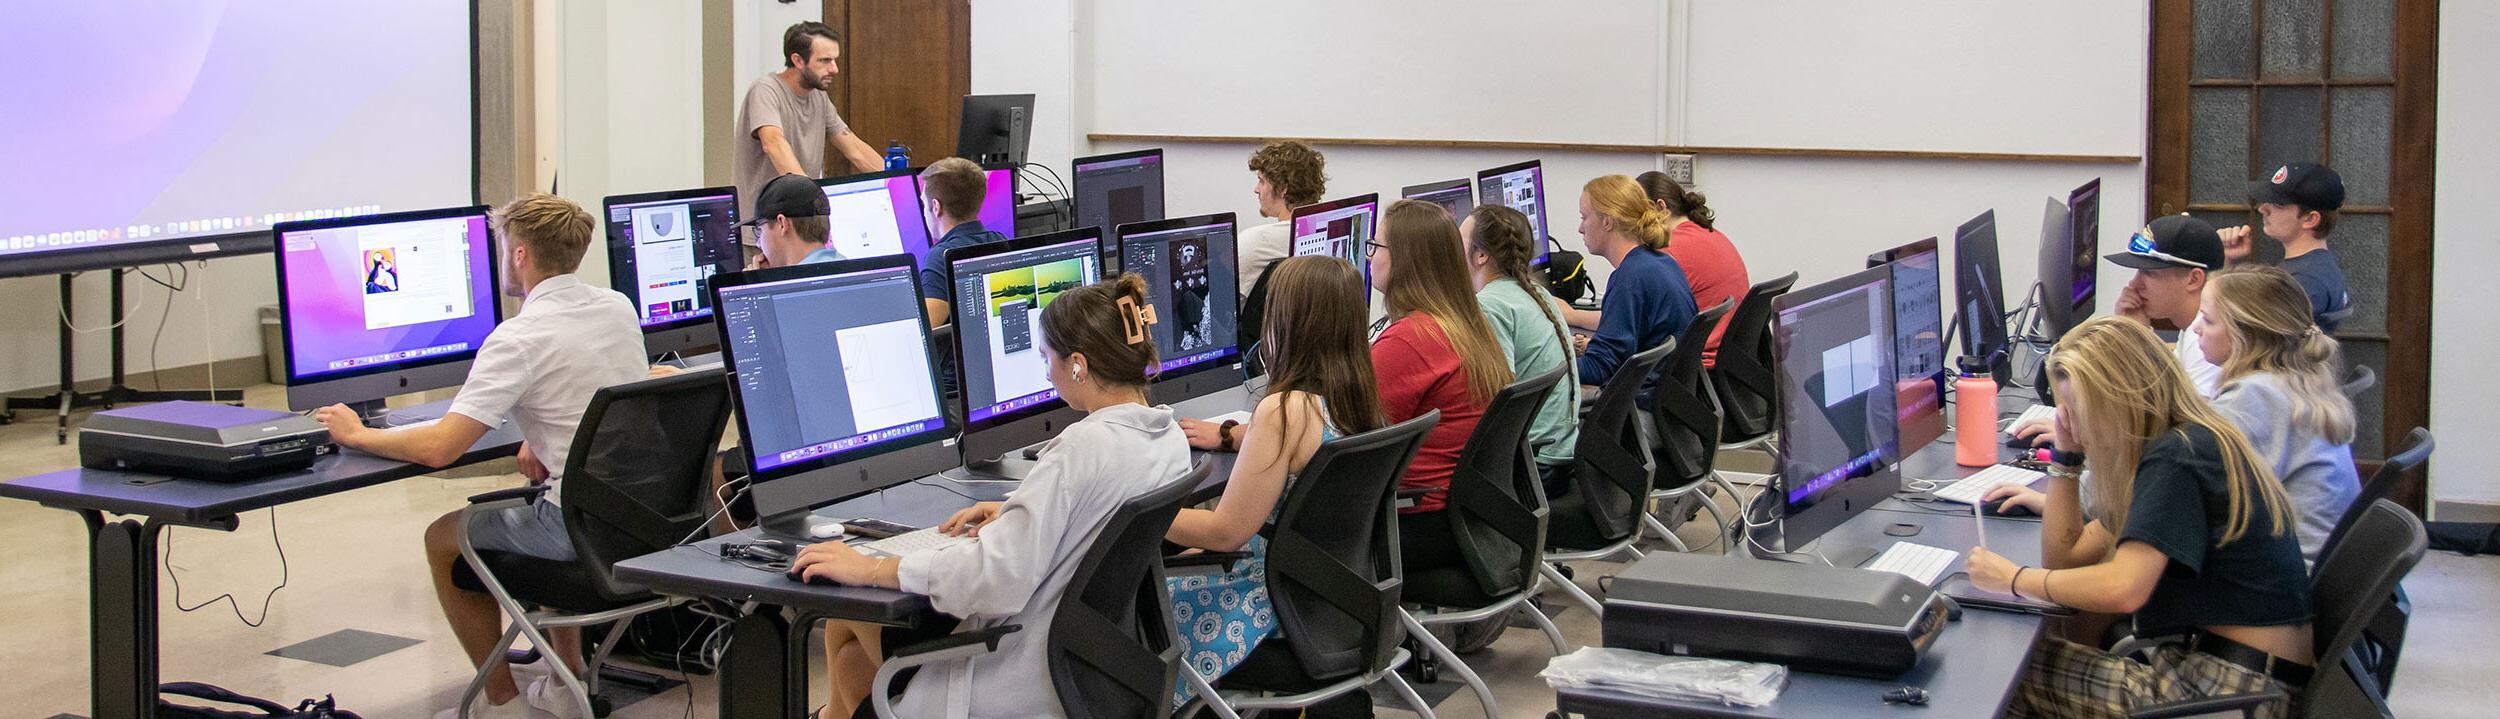 Classroom with three rows of desks with computers with big monitors. Students are seated at desks working with an instructor at the front of the class.